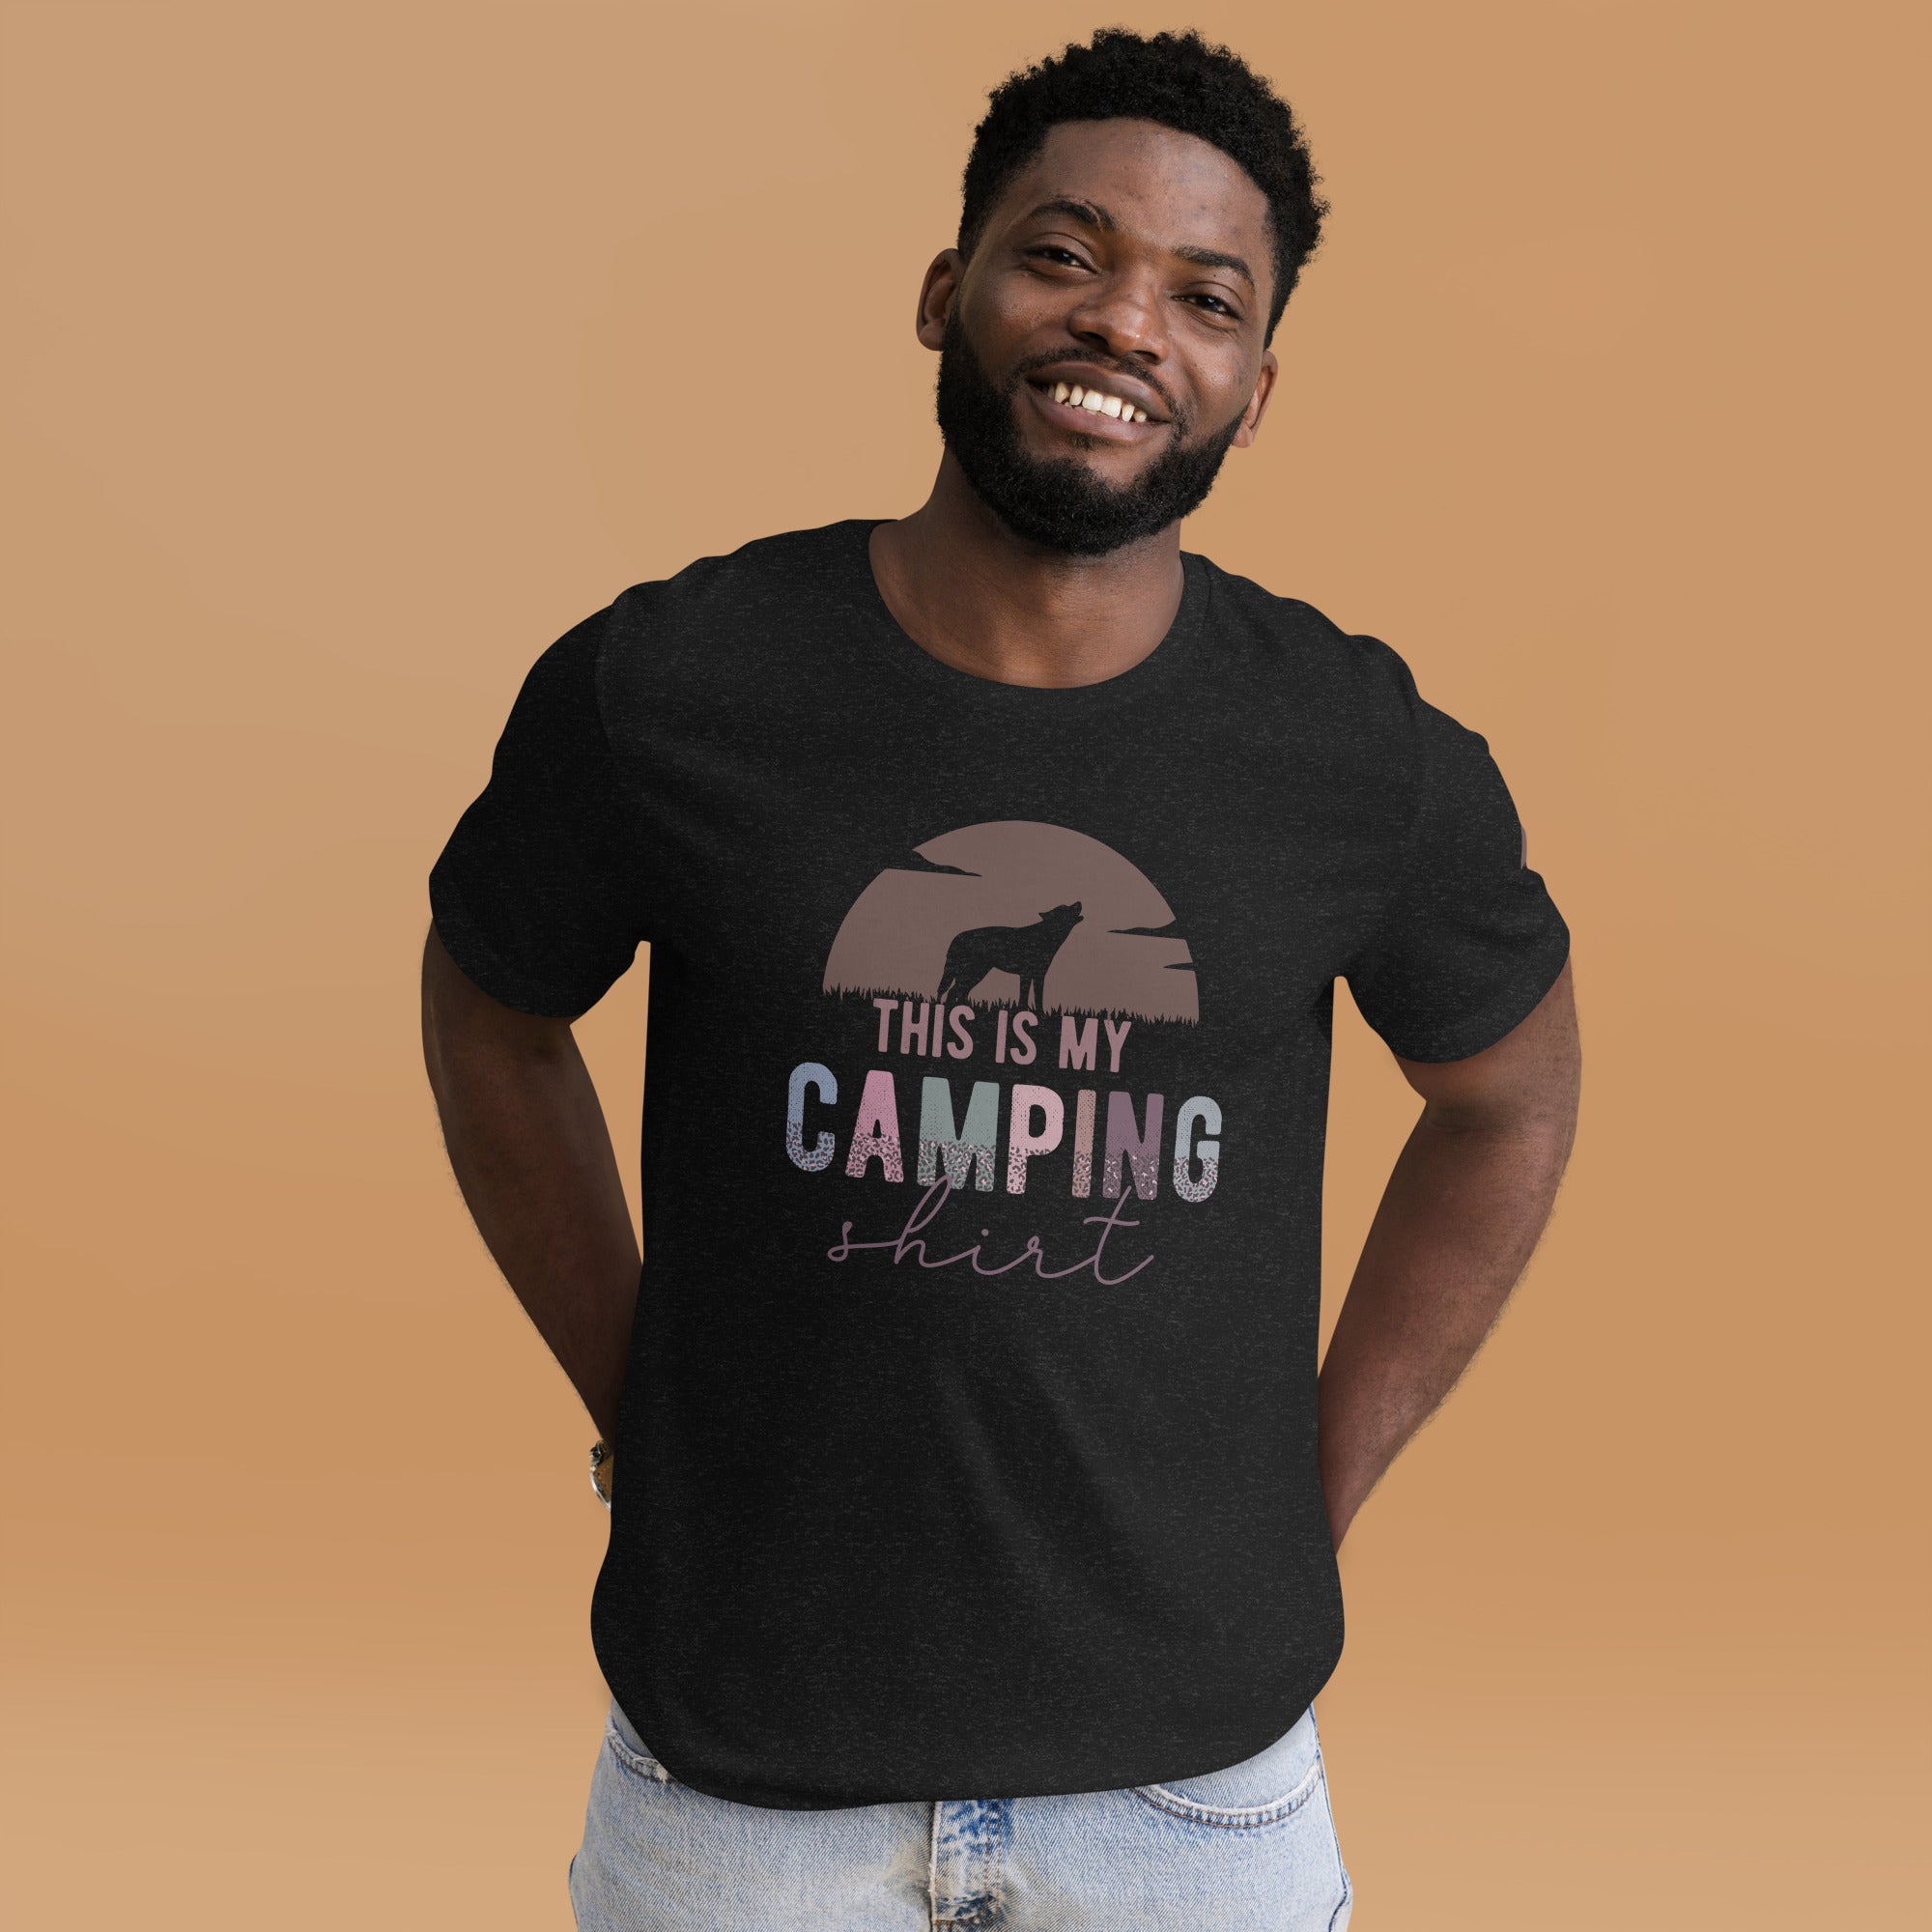 This is My Camping Shirt - Unisex T-Shirt